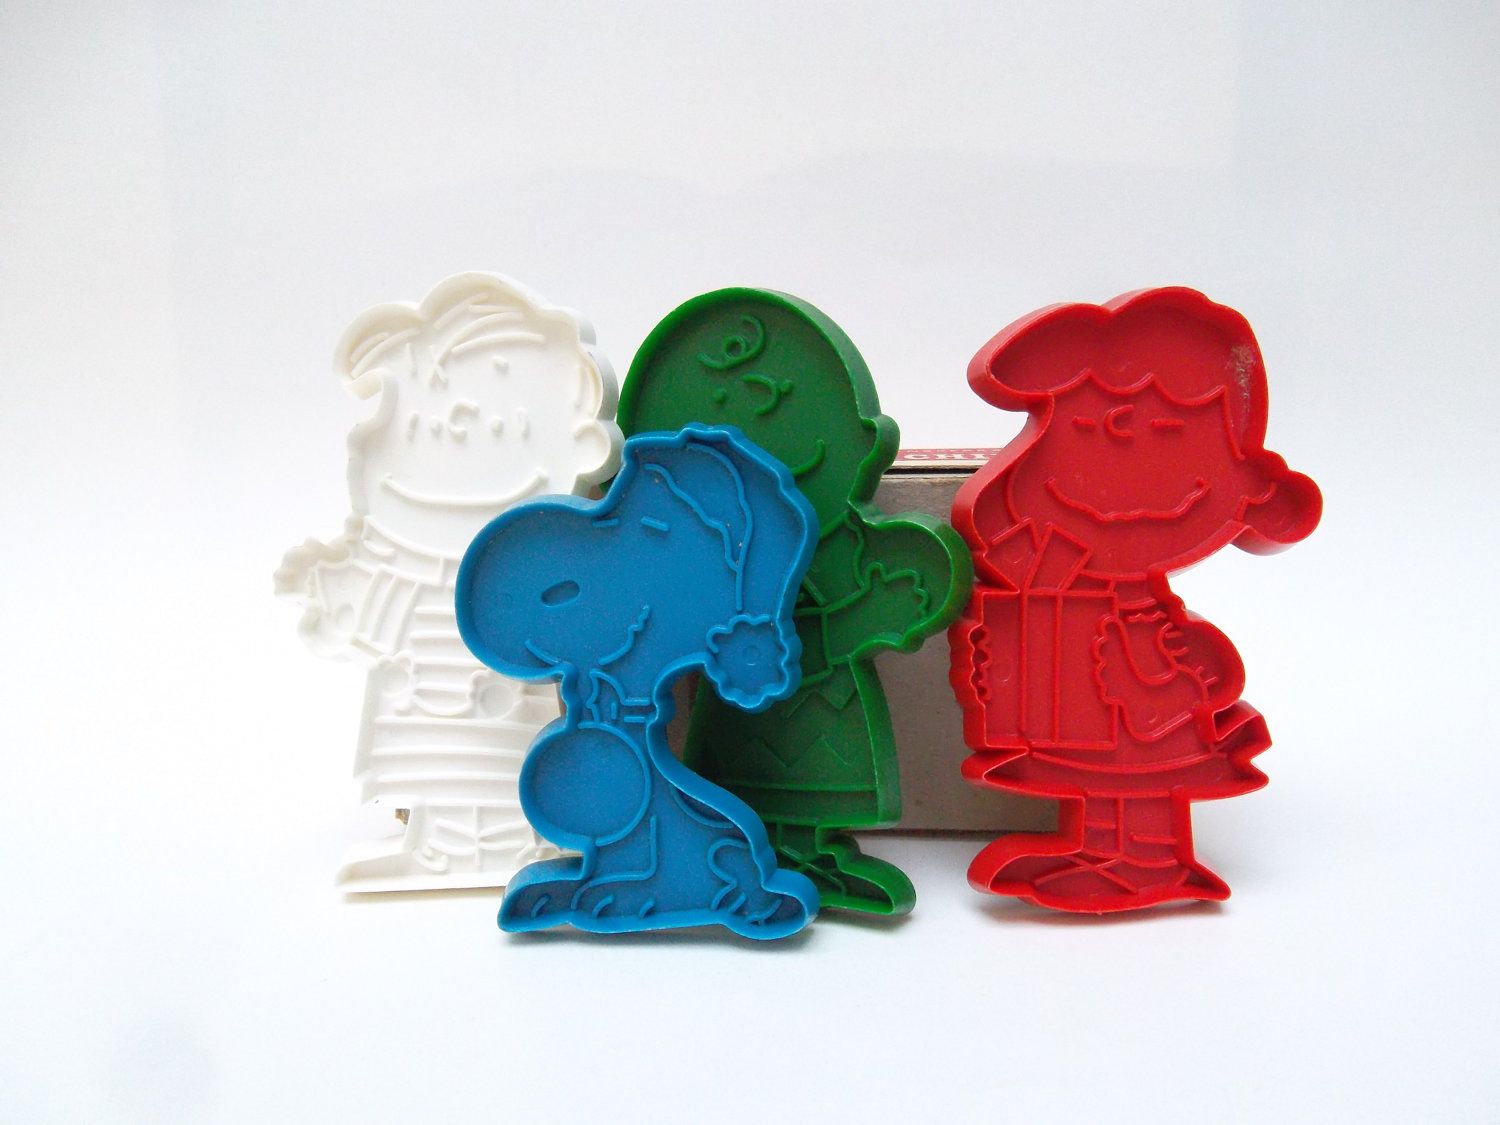 This collection of vintage Charlie Brown cookie cutters is the cutest.